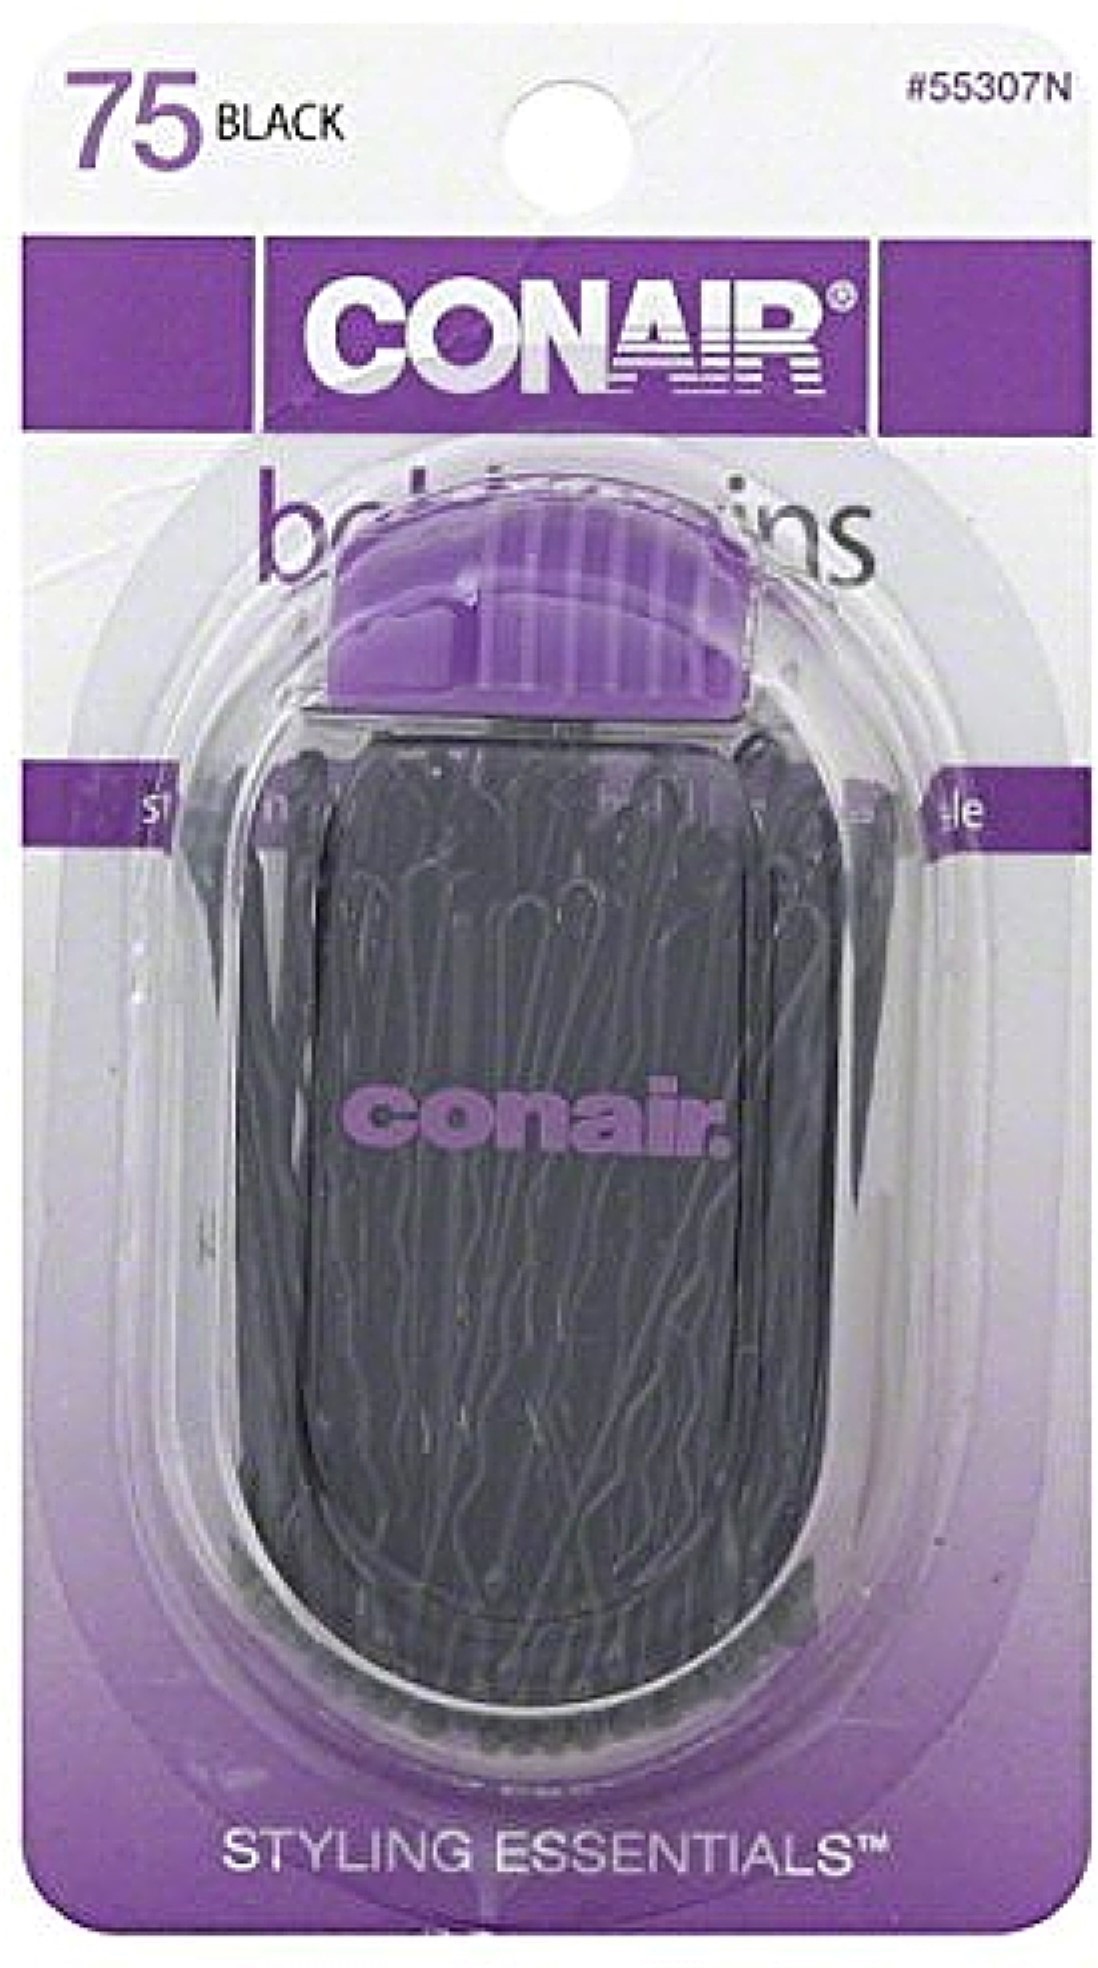 Conair Styling Essentials Bobby Pins, Black, 75 count - image 2 of 2